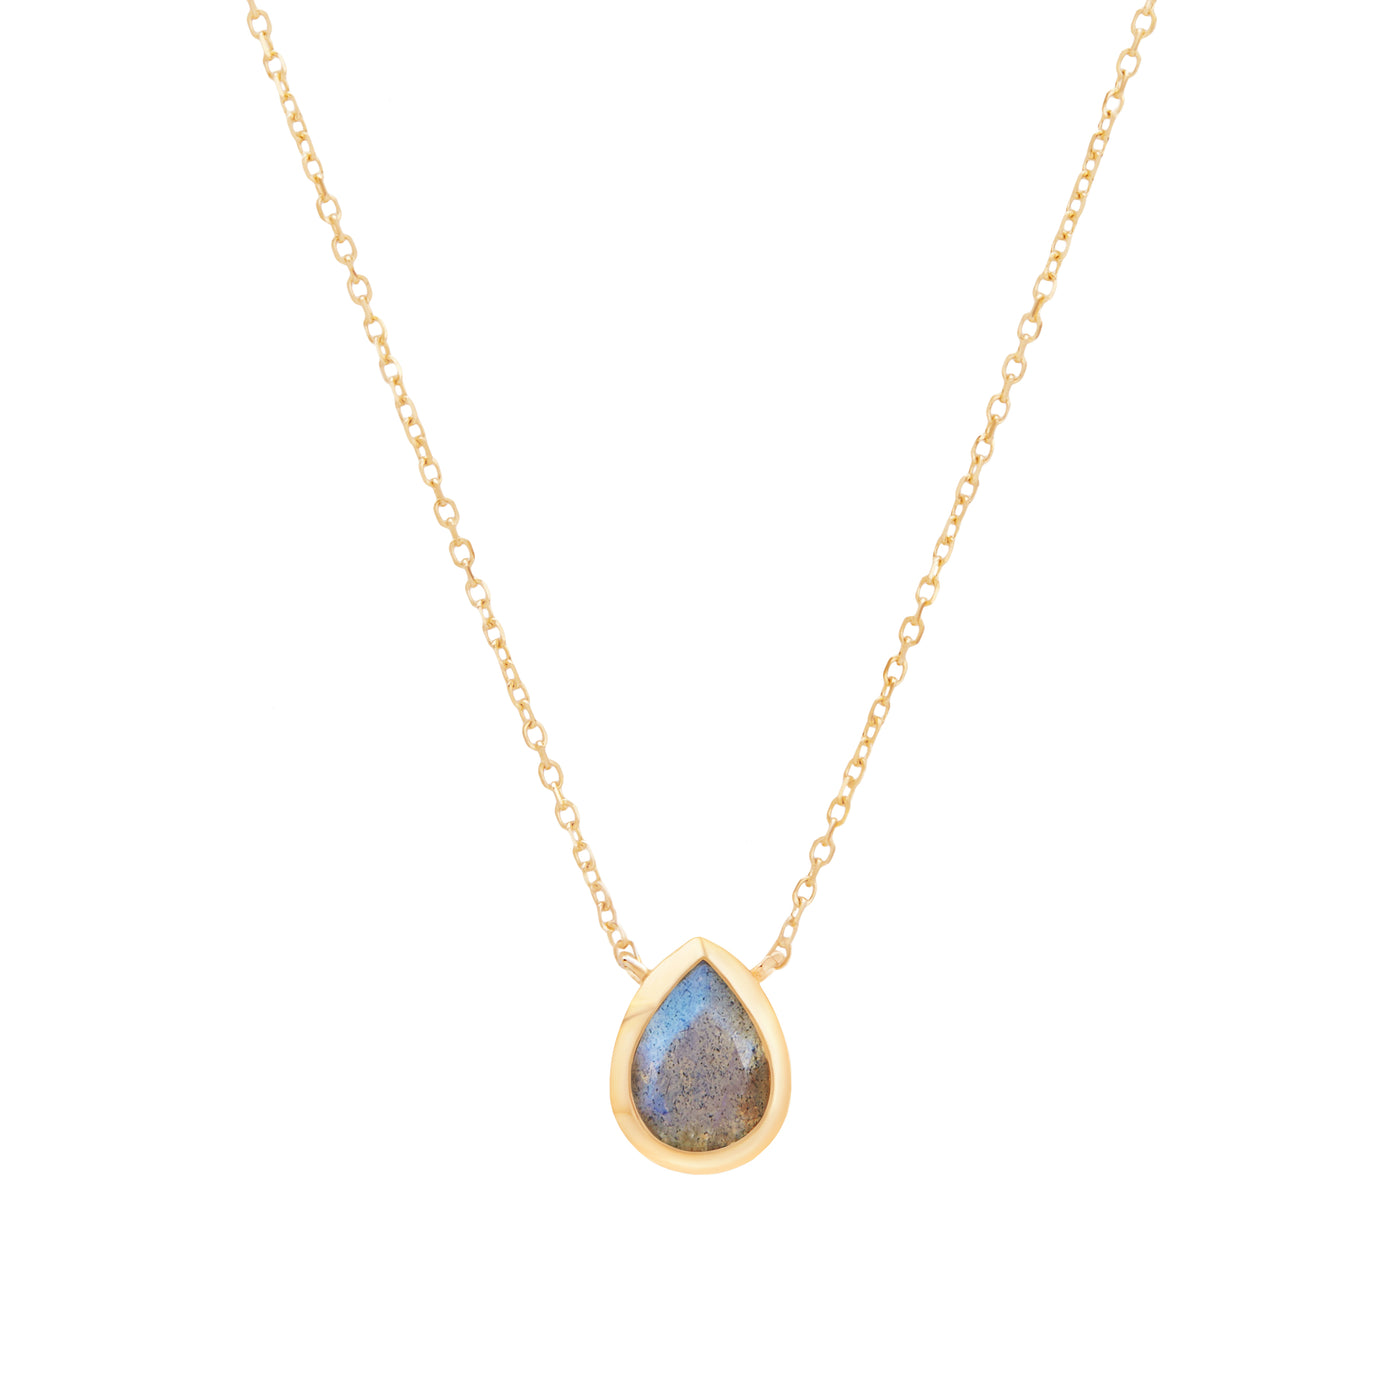 14 Karat Yellow Gold Necklace with Pear Shaped Labradorite Stone Against White Background